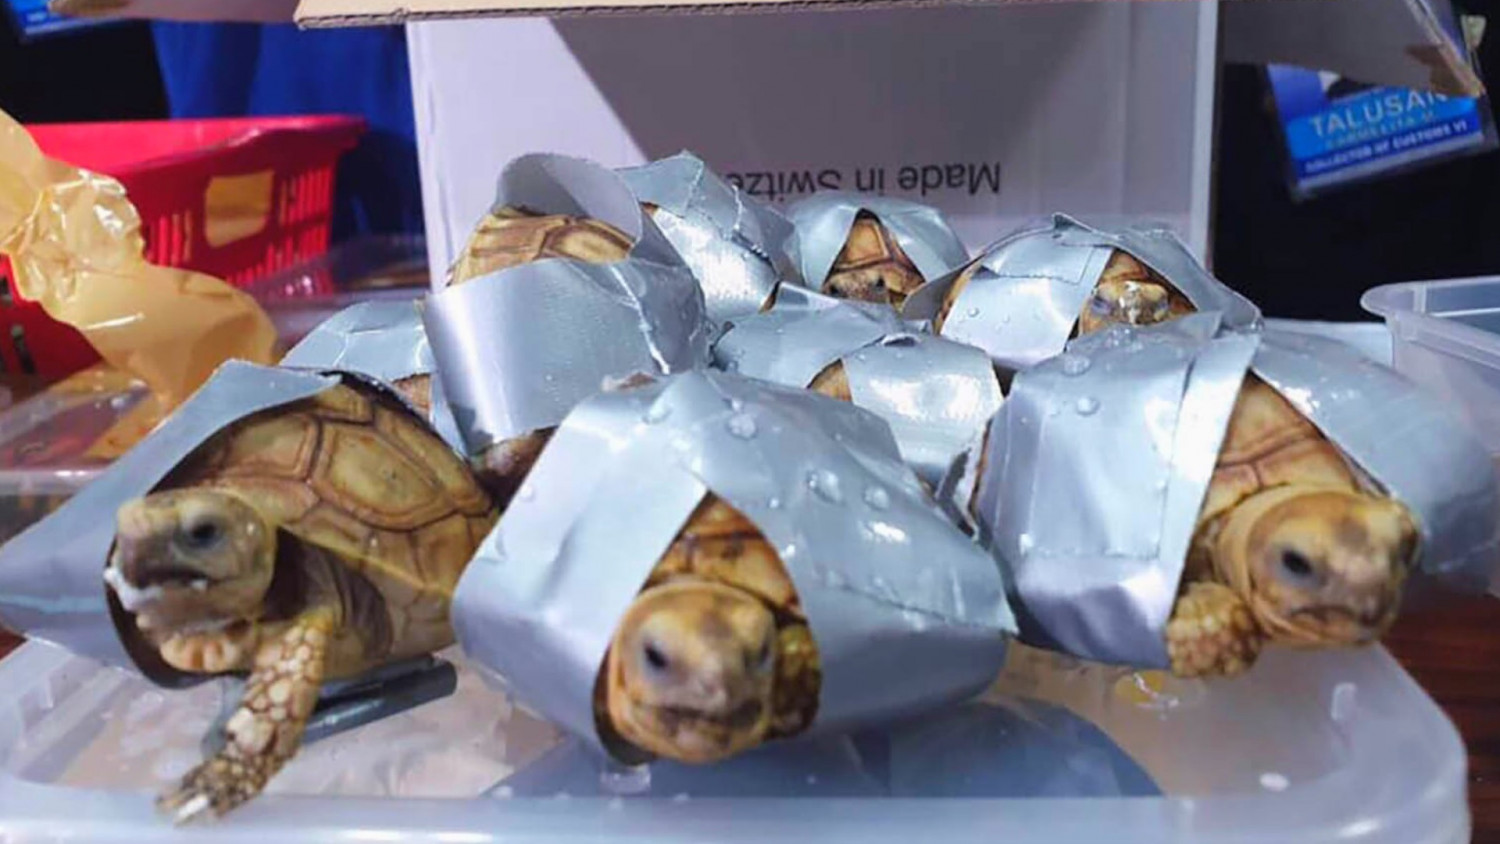 Men Charged for Poaching Thousands of Turtles